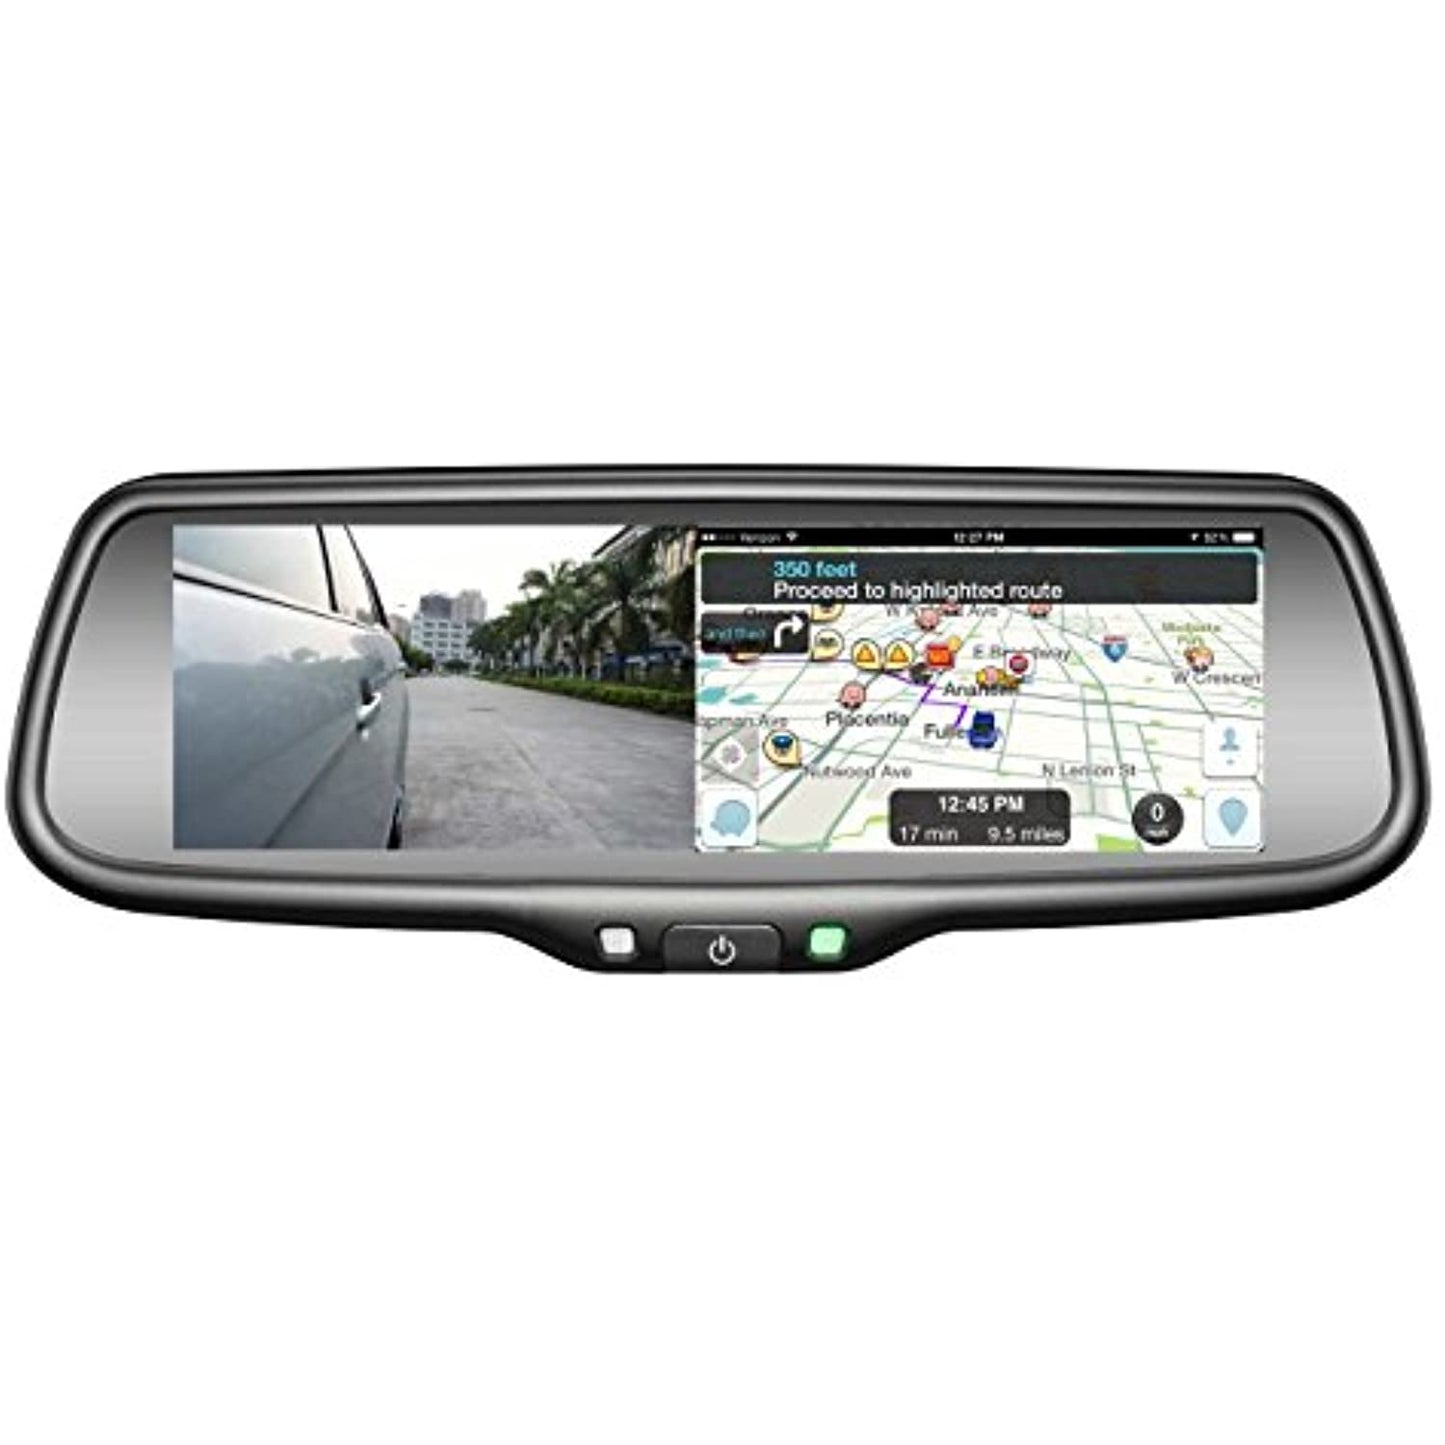 BOYO VISION VTW73M - Replacement Rear-View Mirror with 7.3" TFT-LCD Backup Camera Monitor and Wi-Fi Miracast